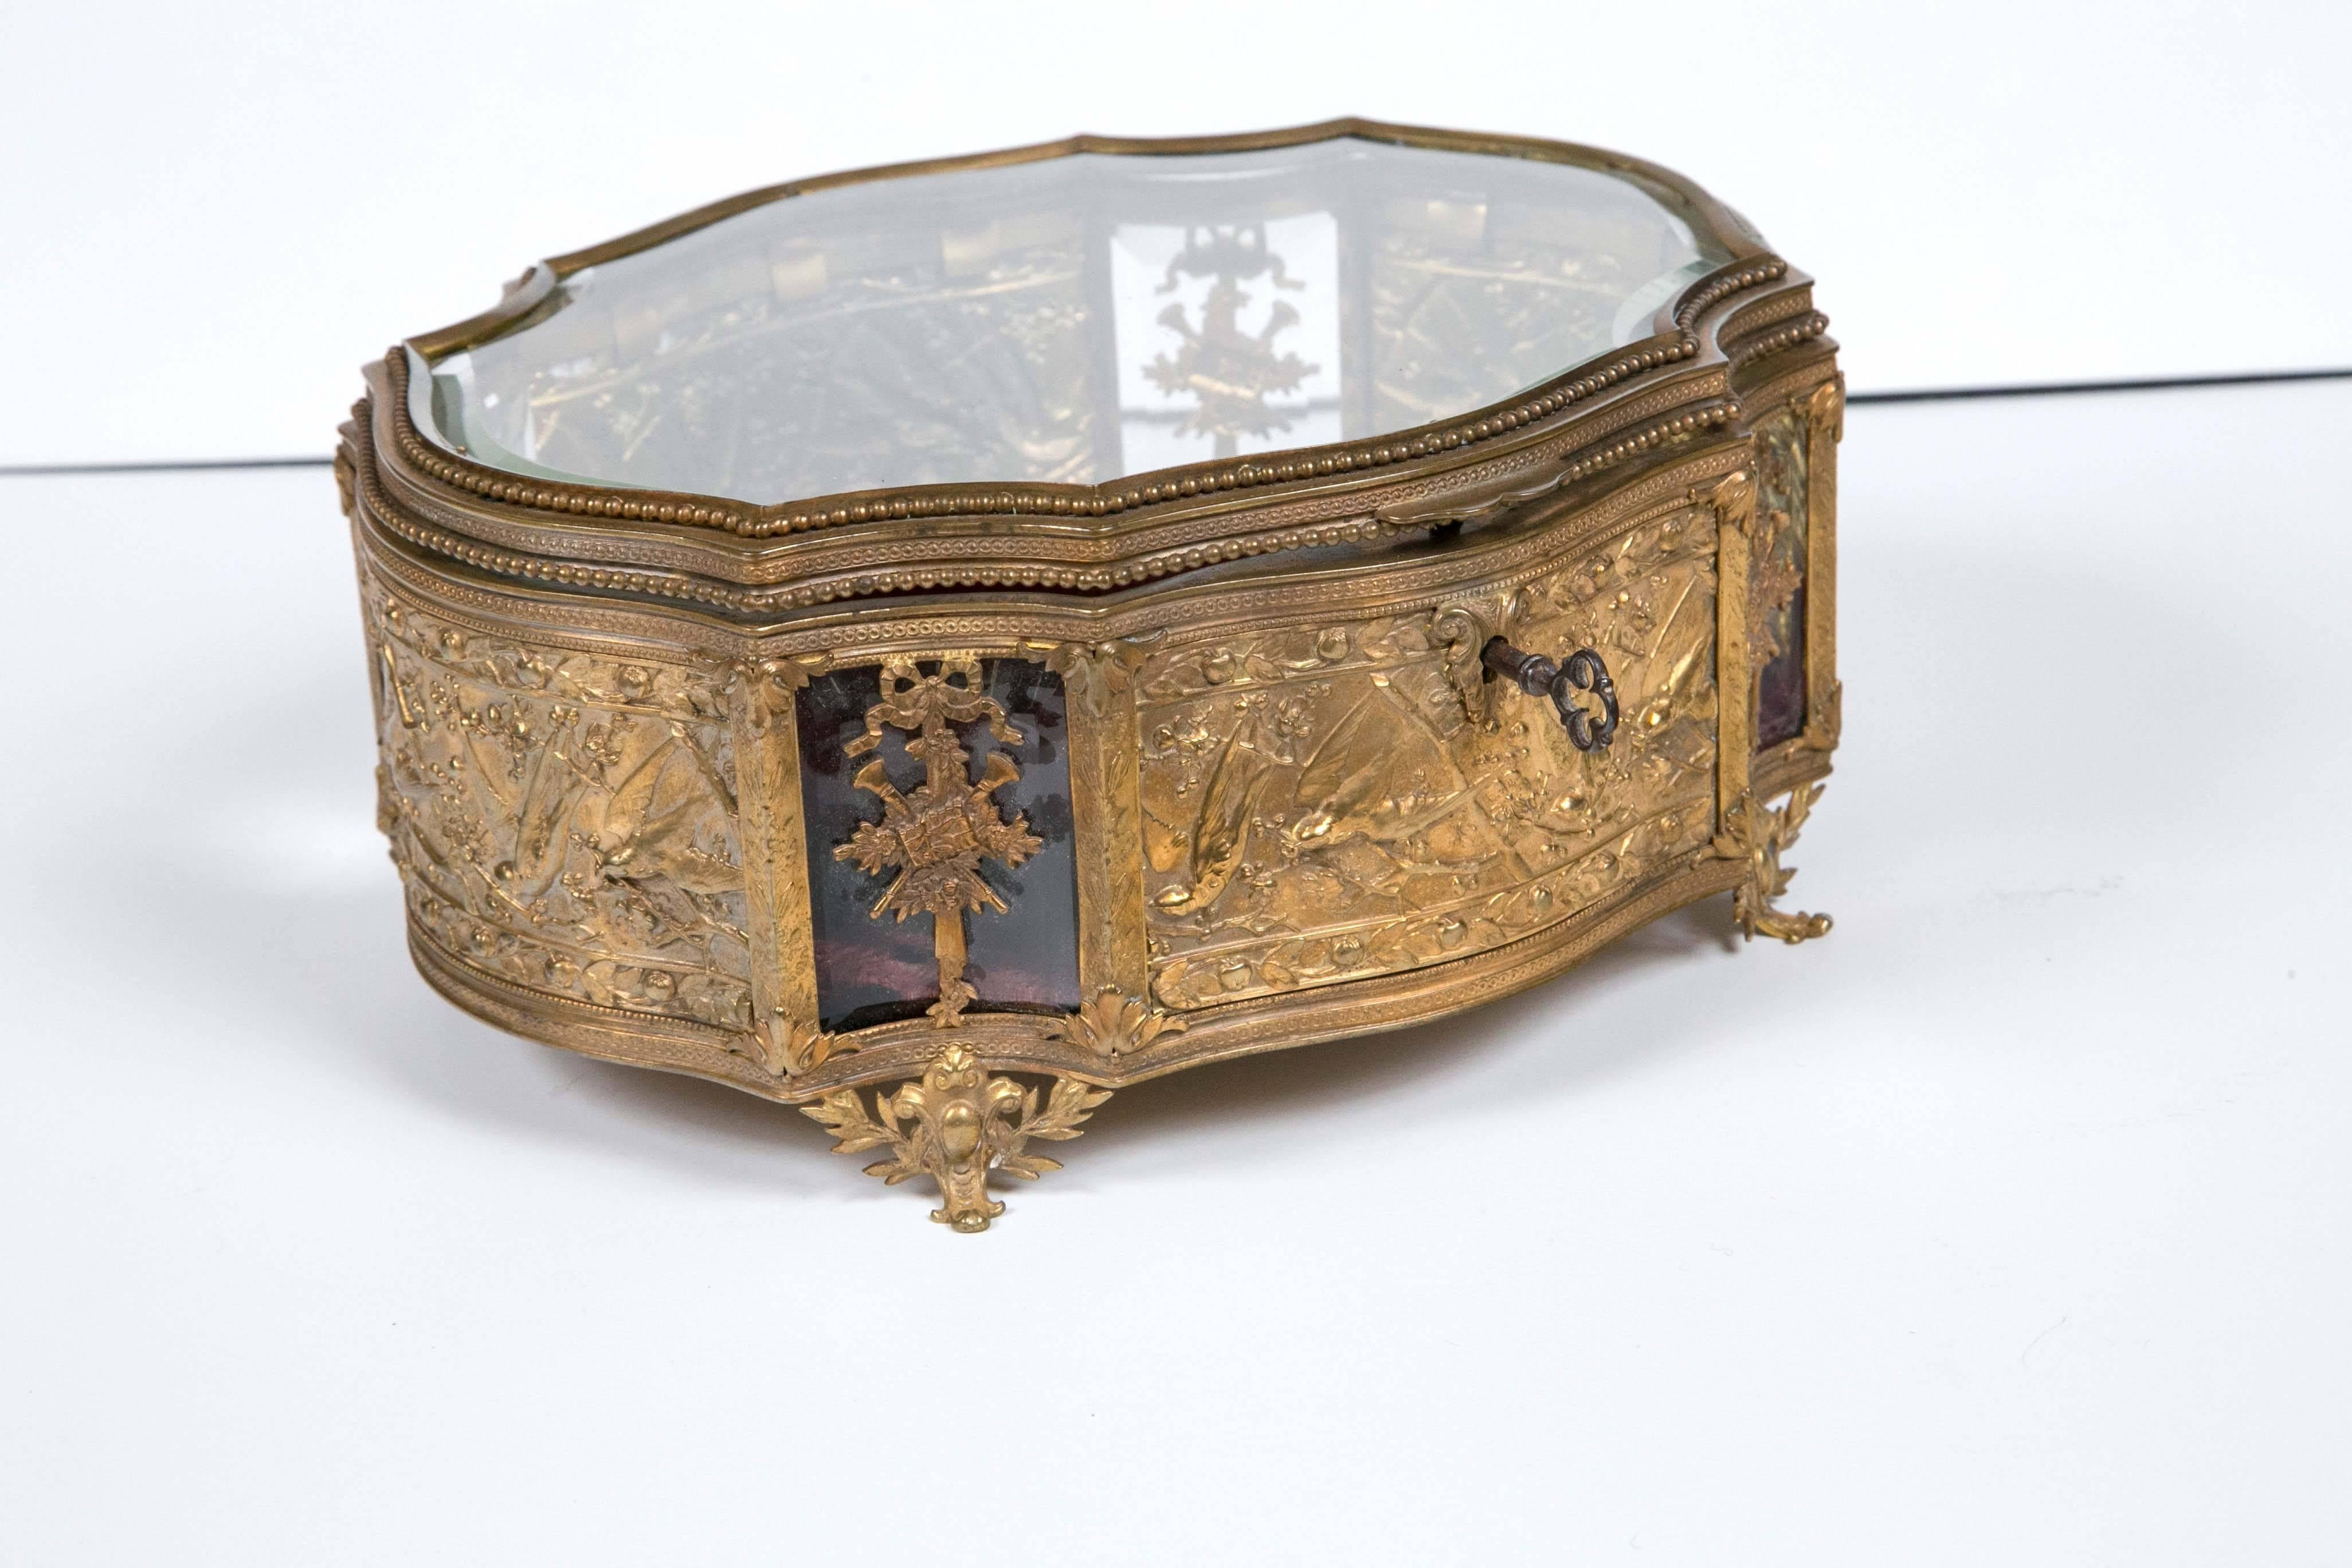 Antique French 1860 bronze beveled crystal box doré keepsake/ vitrine box in absolutely beautiful condition. We have acquired many antiques from a private collector. This box has is embossed with bows, swags, trumpets and birds.
Fleur-de-lis